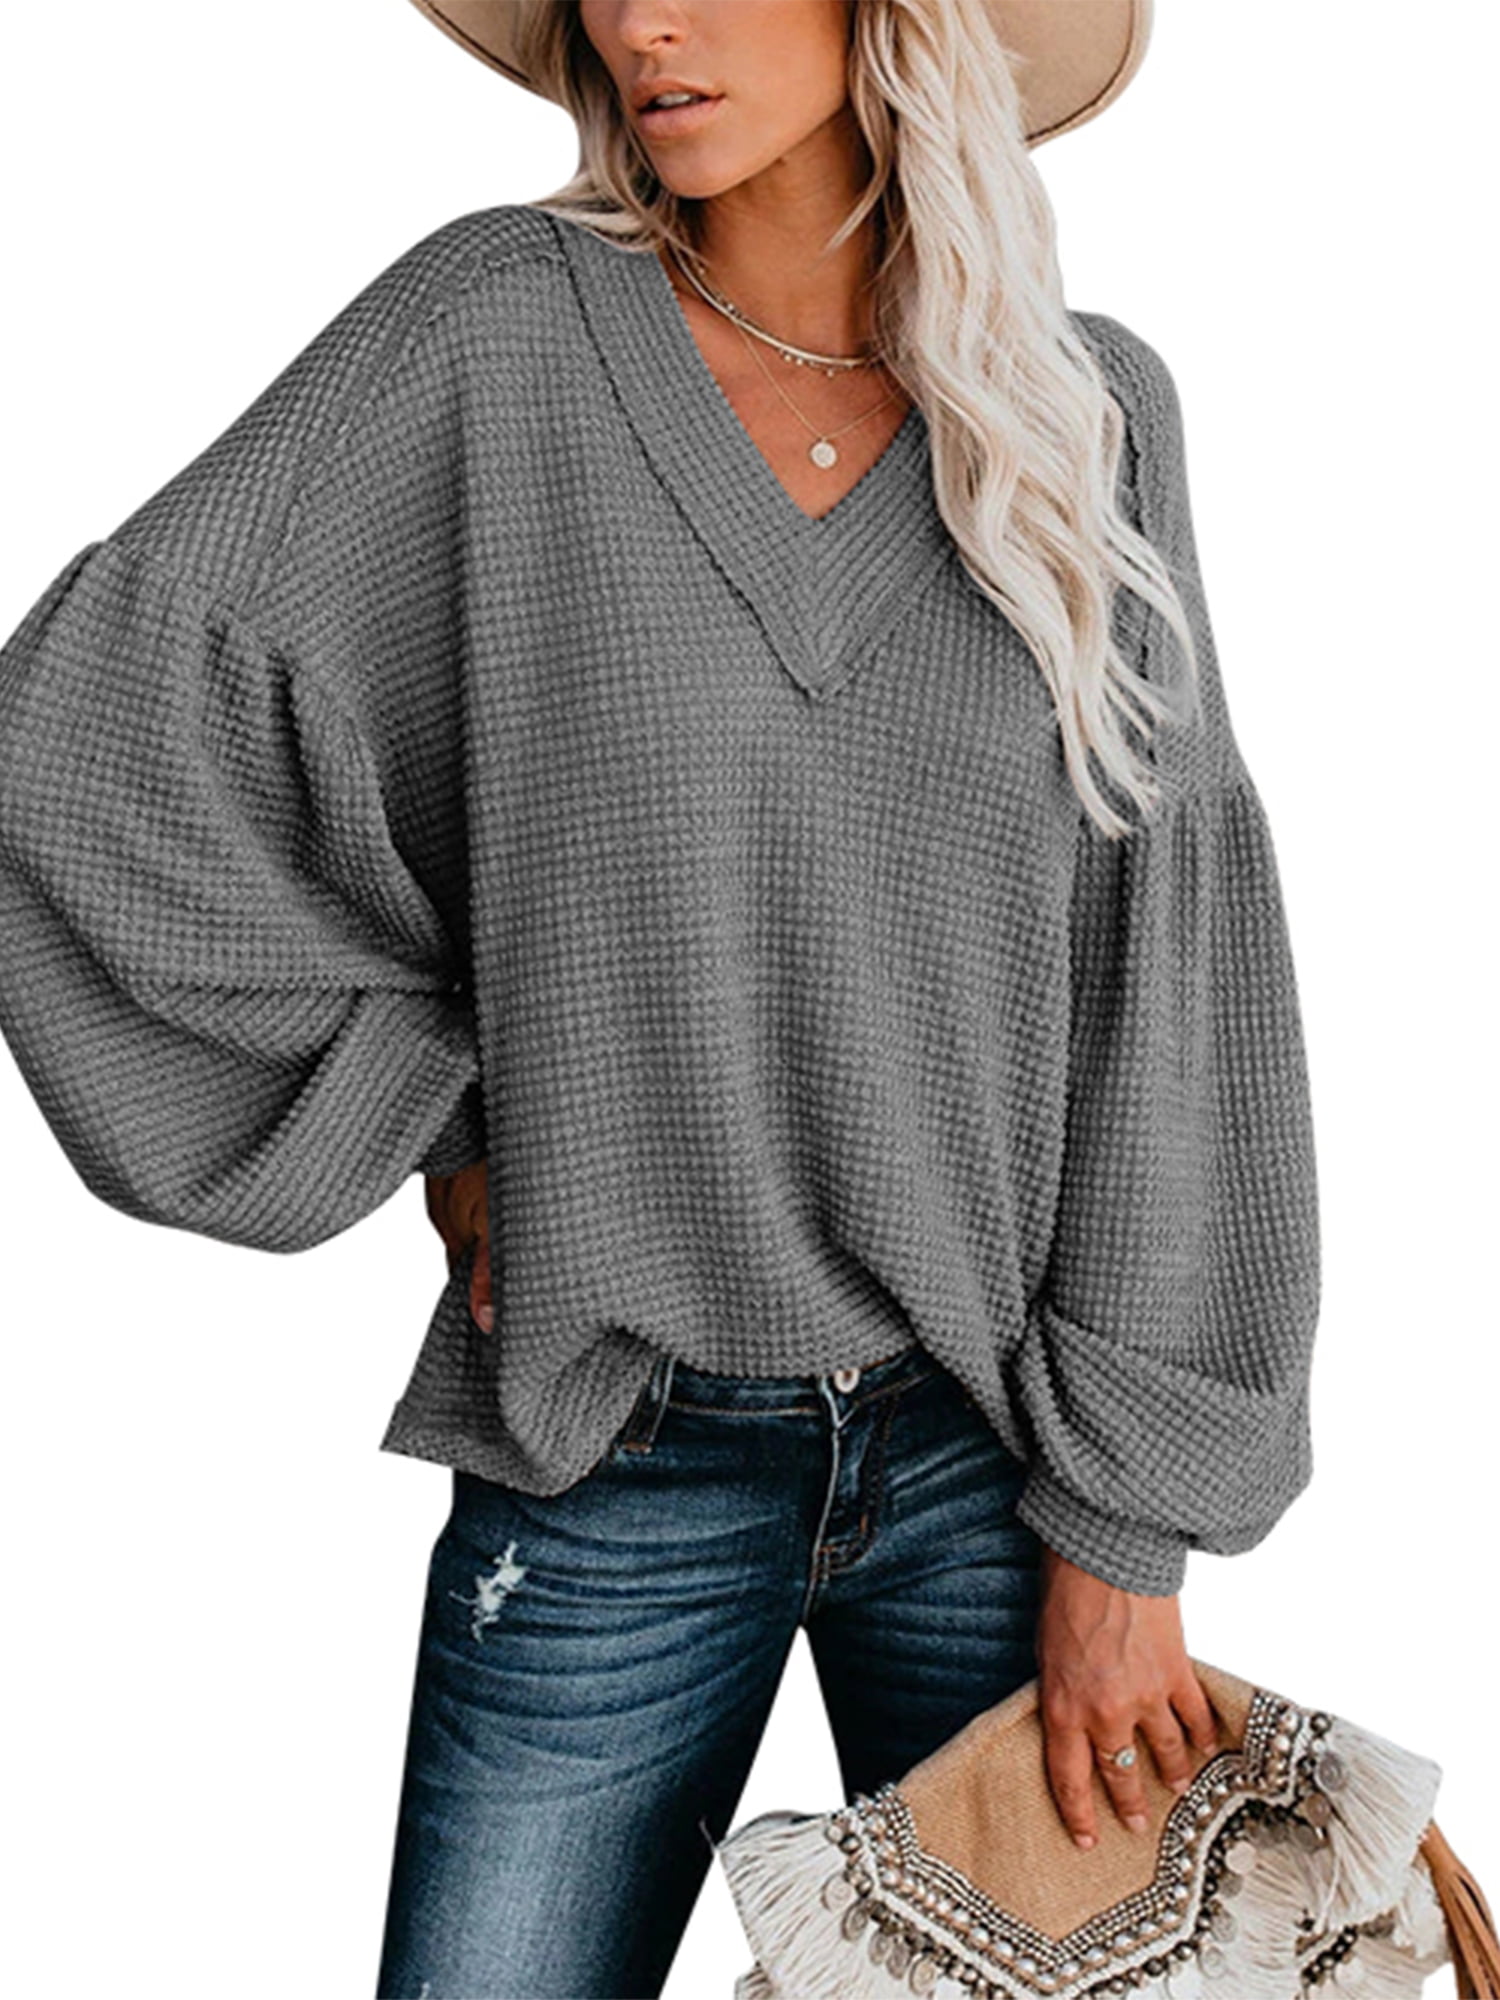 Lazzboy Sweater Womens Puff Long Sleeve Shirt Knitted Casual Solid Loose V Neck Oversize Baggy Plus Size Pullover Slouch Tops